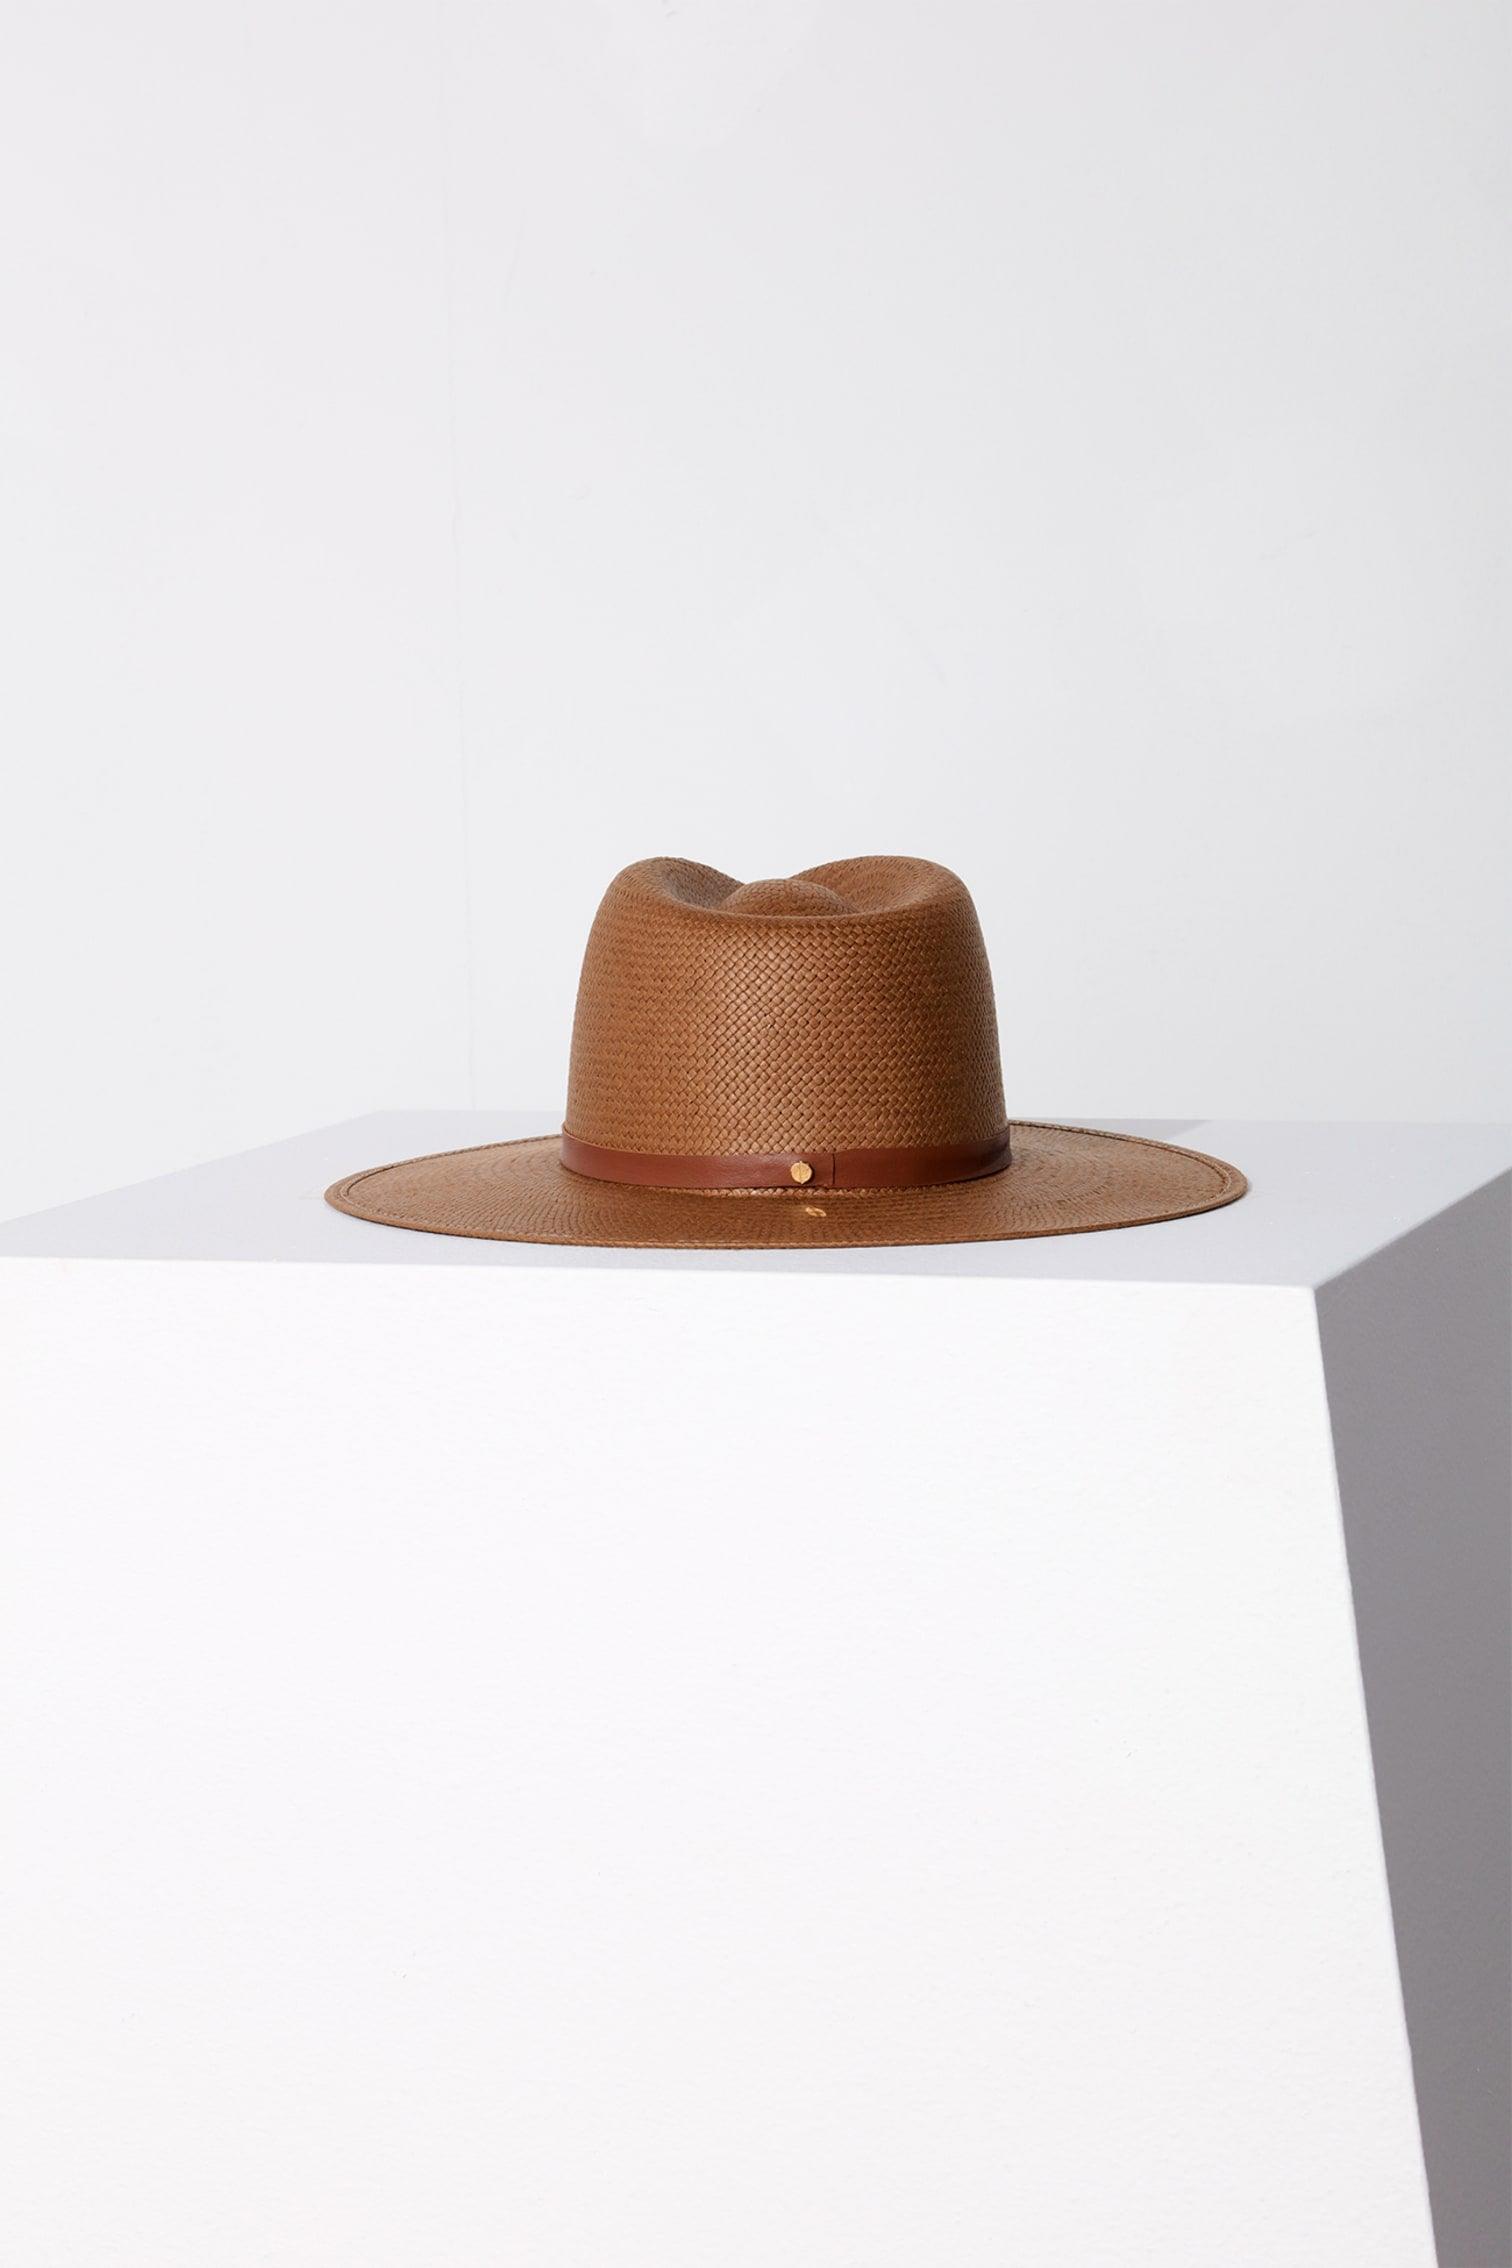 Sherman Hat in Brown by Janessa Leoné - Haven